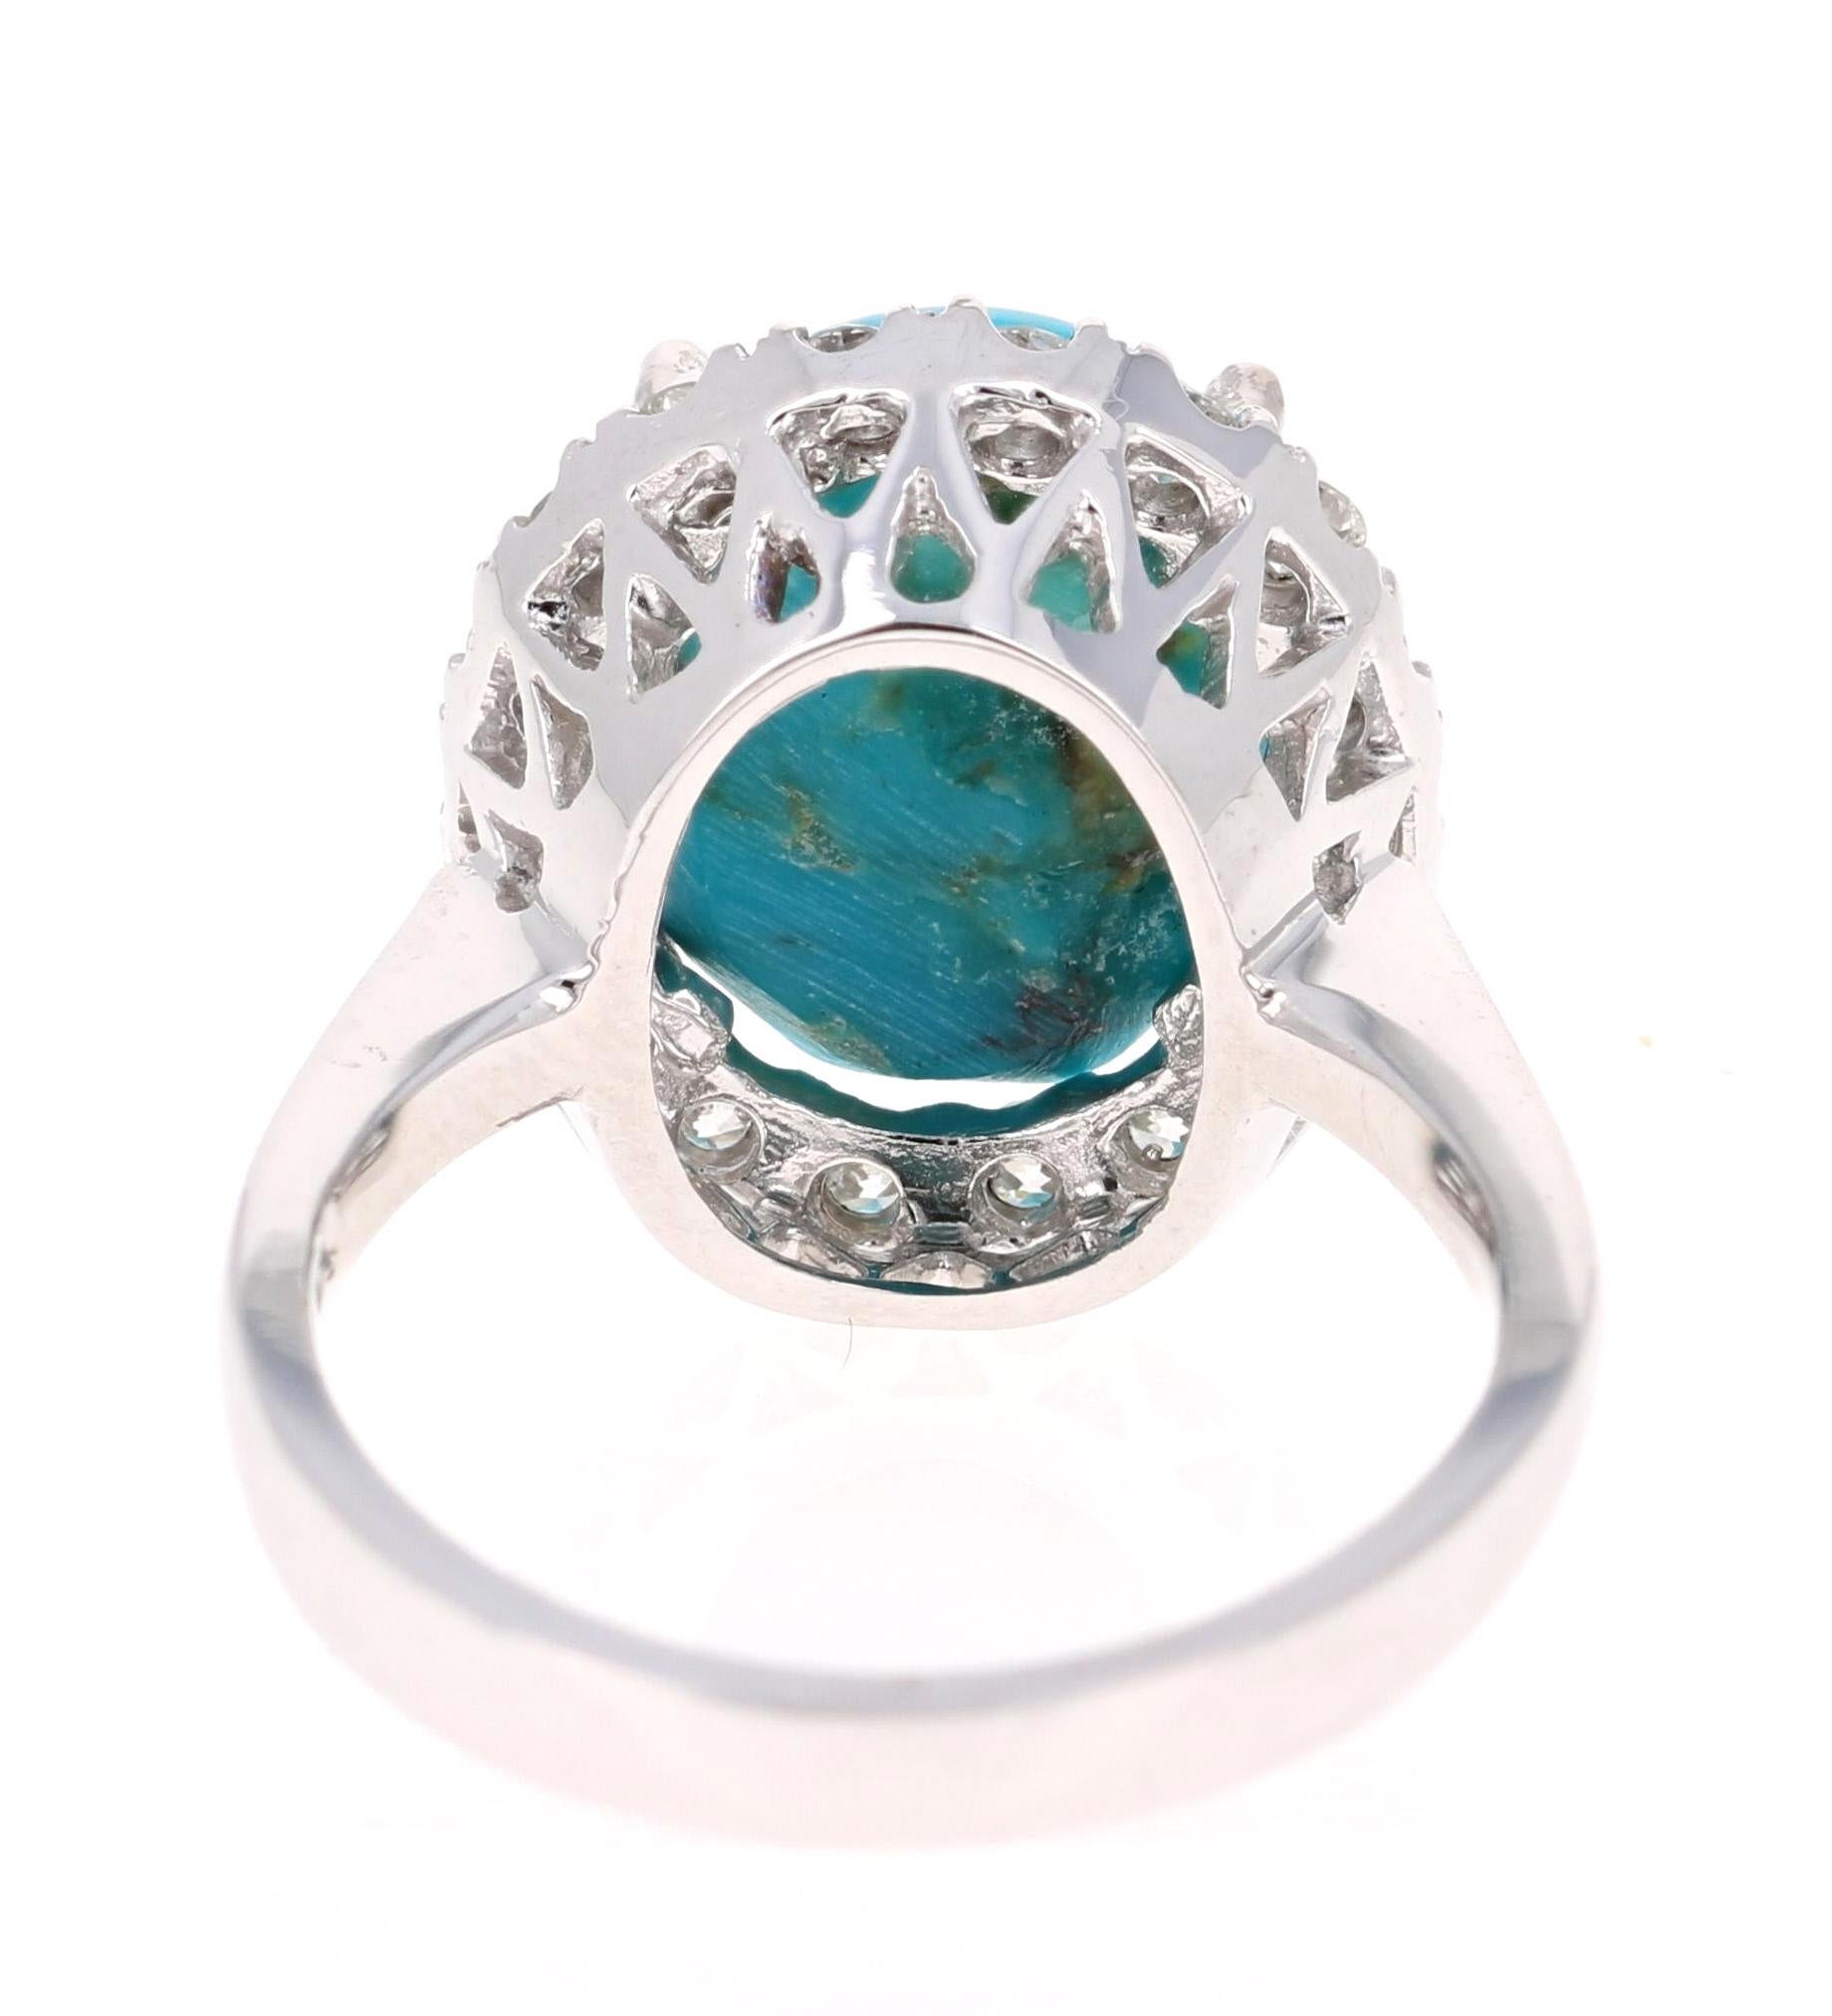 7.28 Carat Oval Cut Turquoise Diamond White Gold Cocktail Ring In New Condition For Sale In Los Angeles, CA